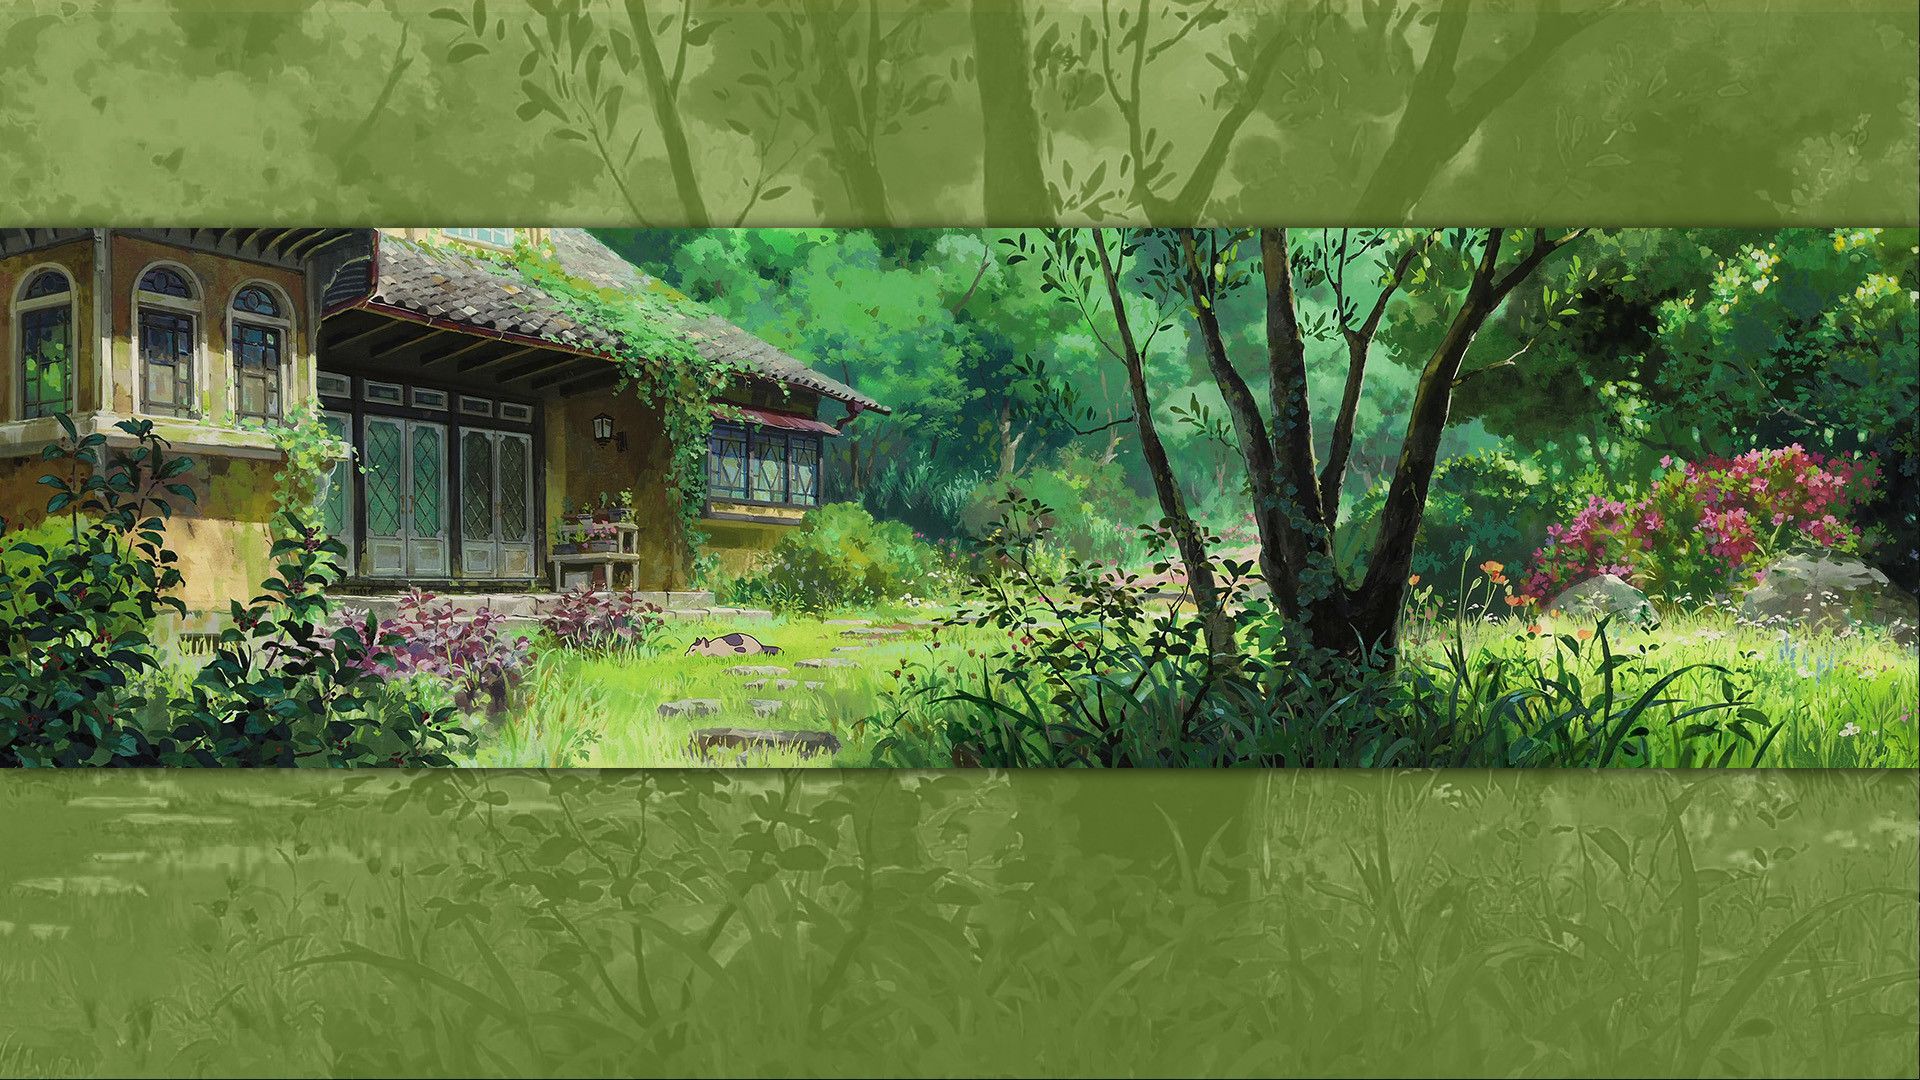 Imgur: The most awesome image on the Internet. Studio ghibli background, Anime scenery, Secret world of arrietty